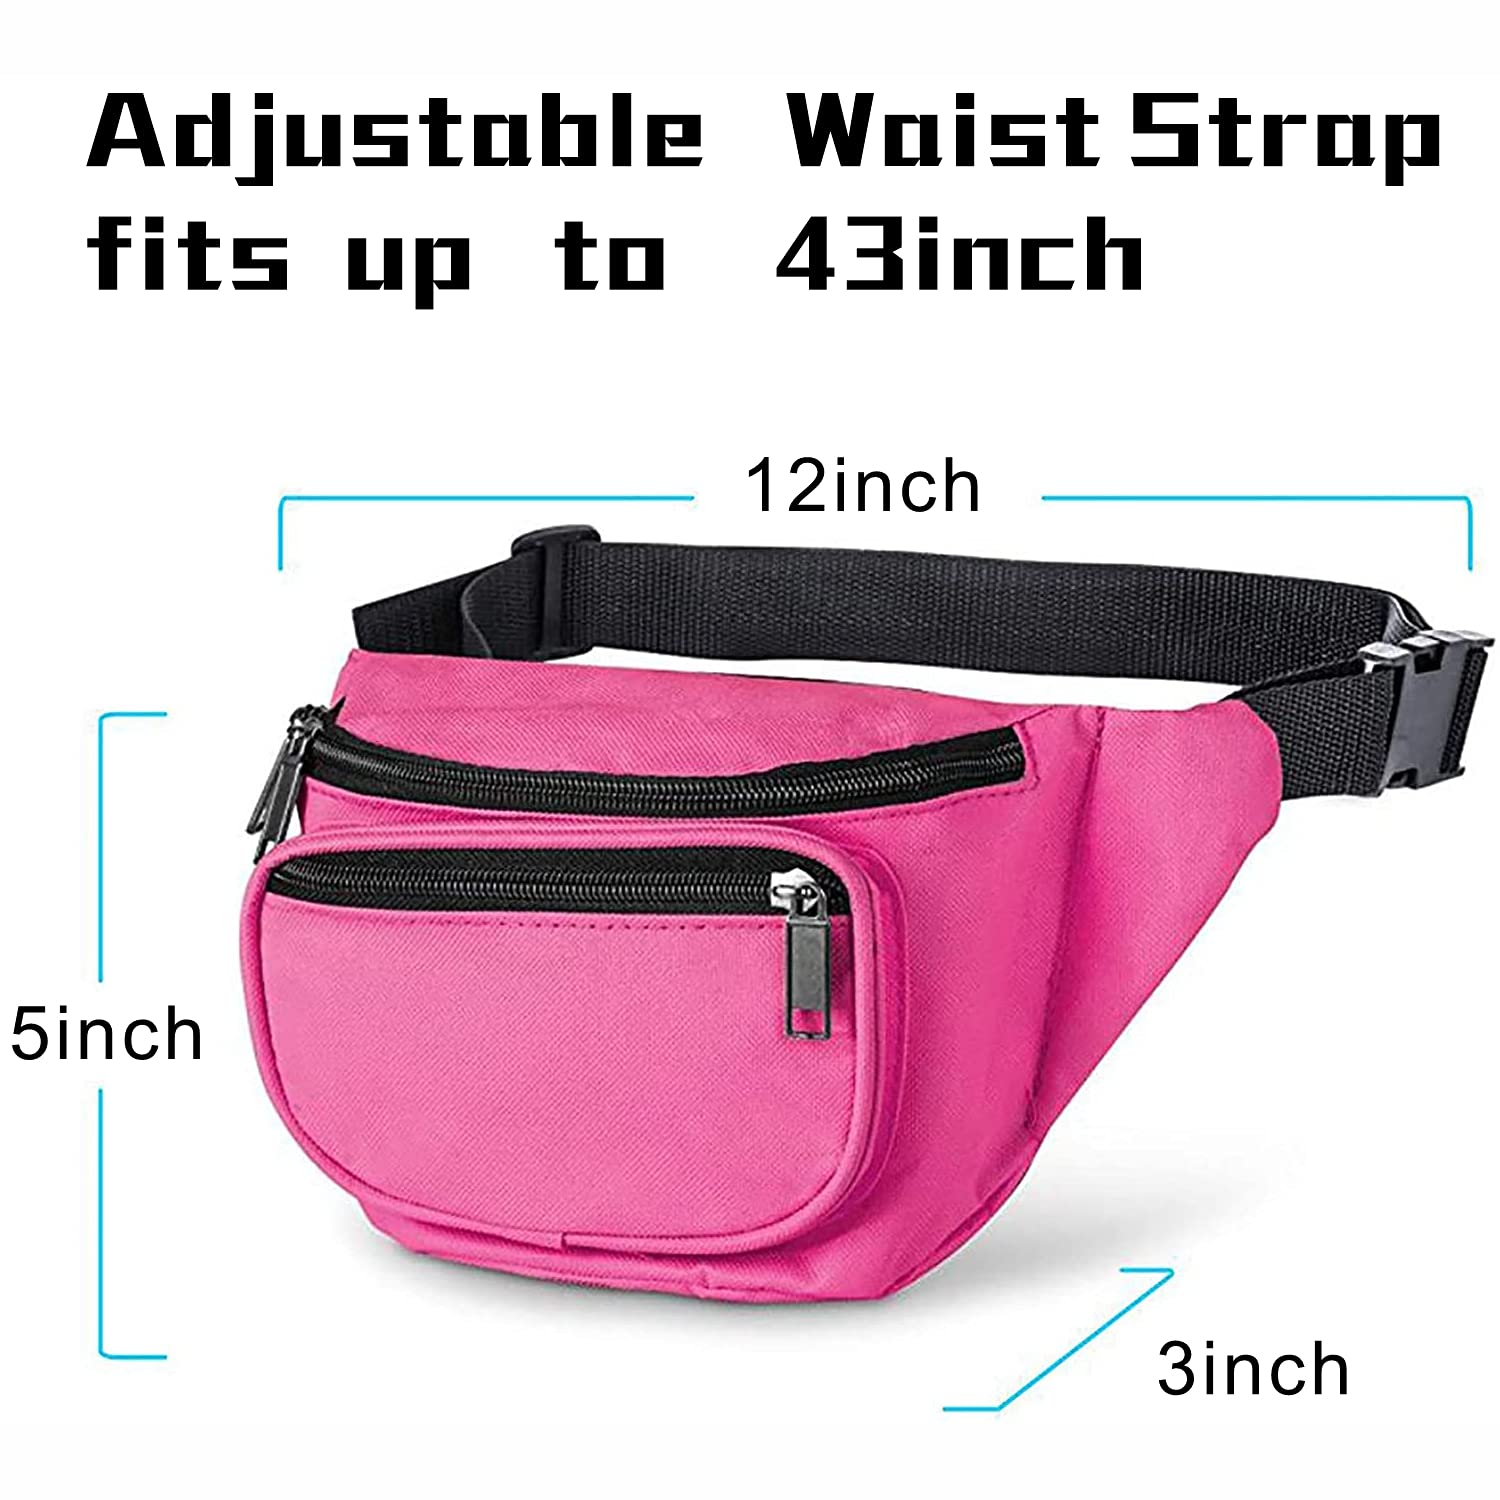 Fanny Pack, AirBuyW 3 Zippered Compartments Adjustable Strap Crossbody Festival Workout Concert Traveling Running Biking Sport Fashion Waist Fanny Pack Bag For Women Men Pink